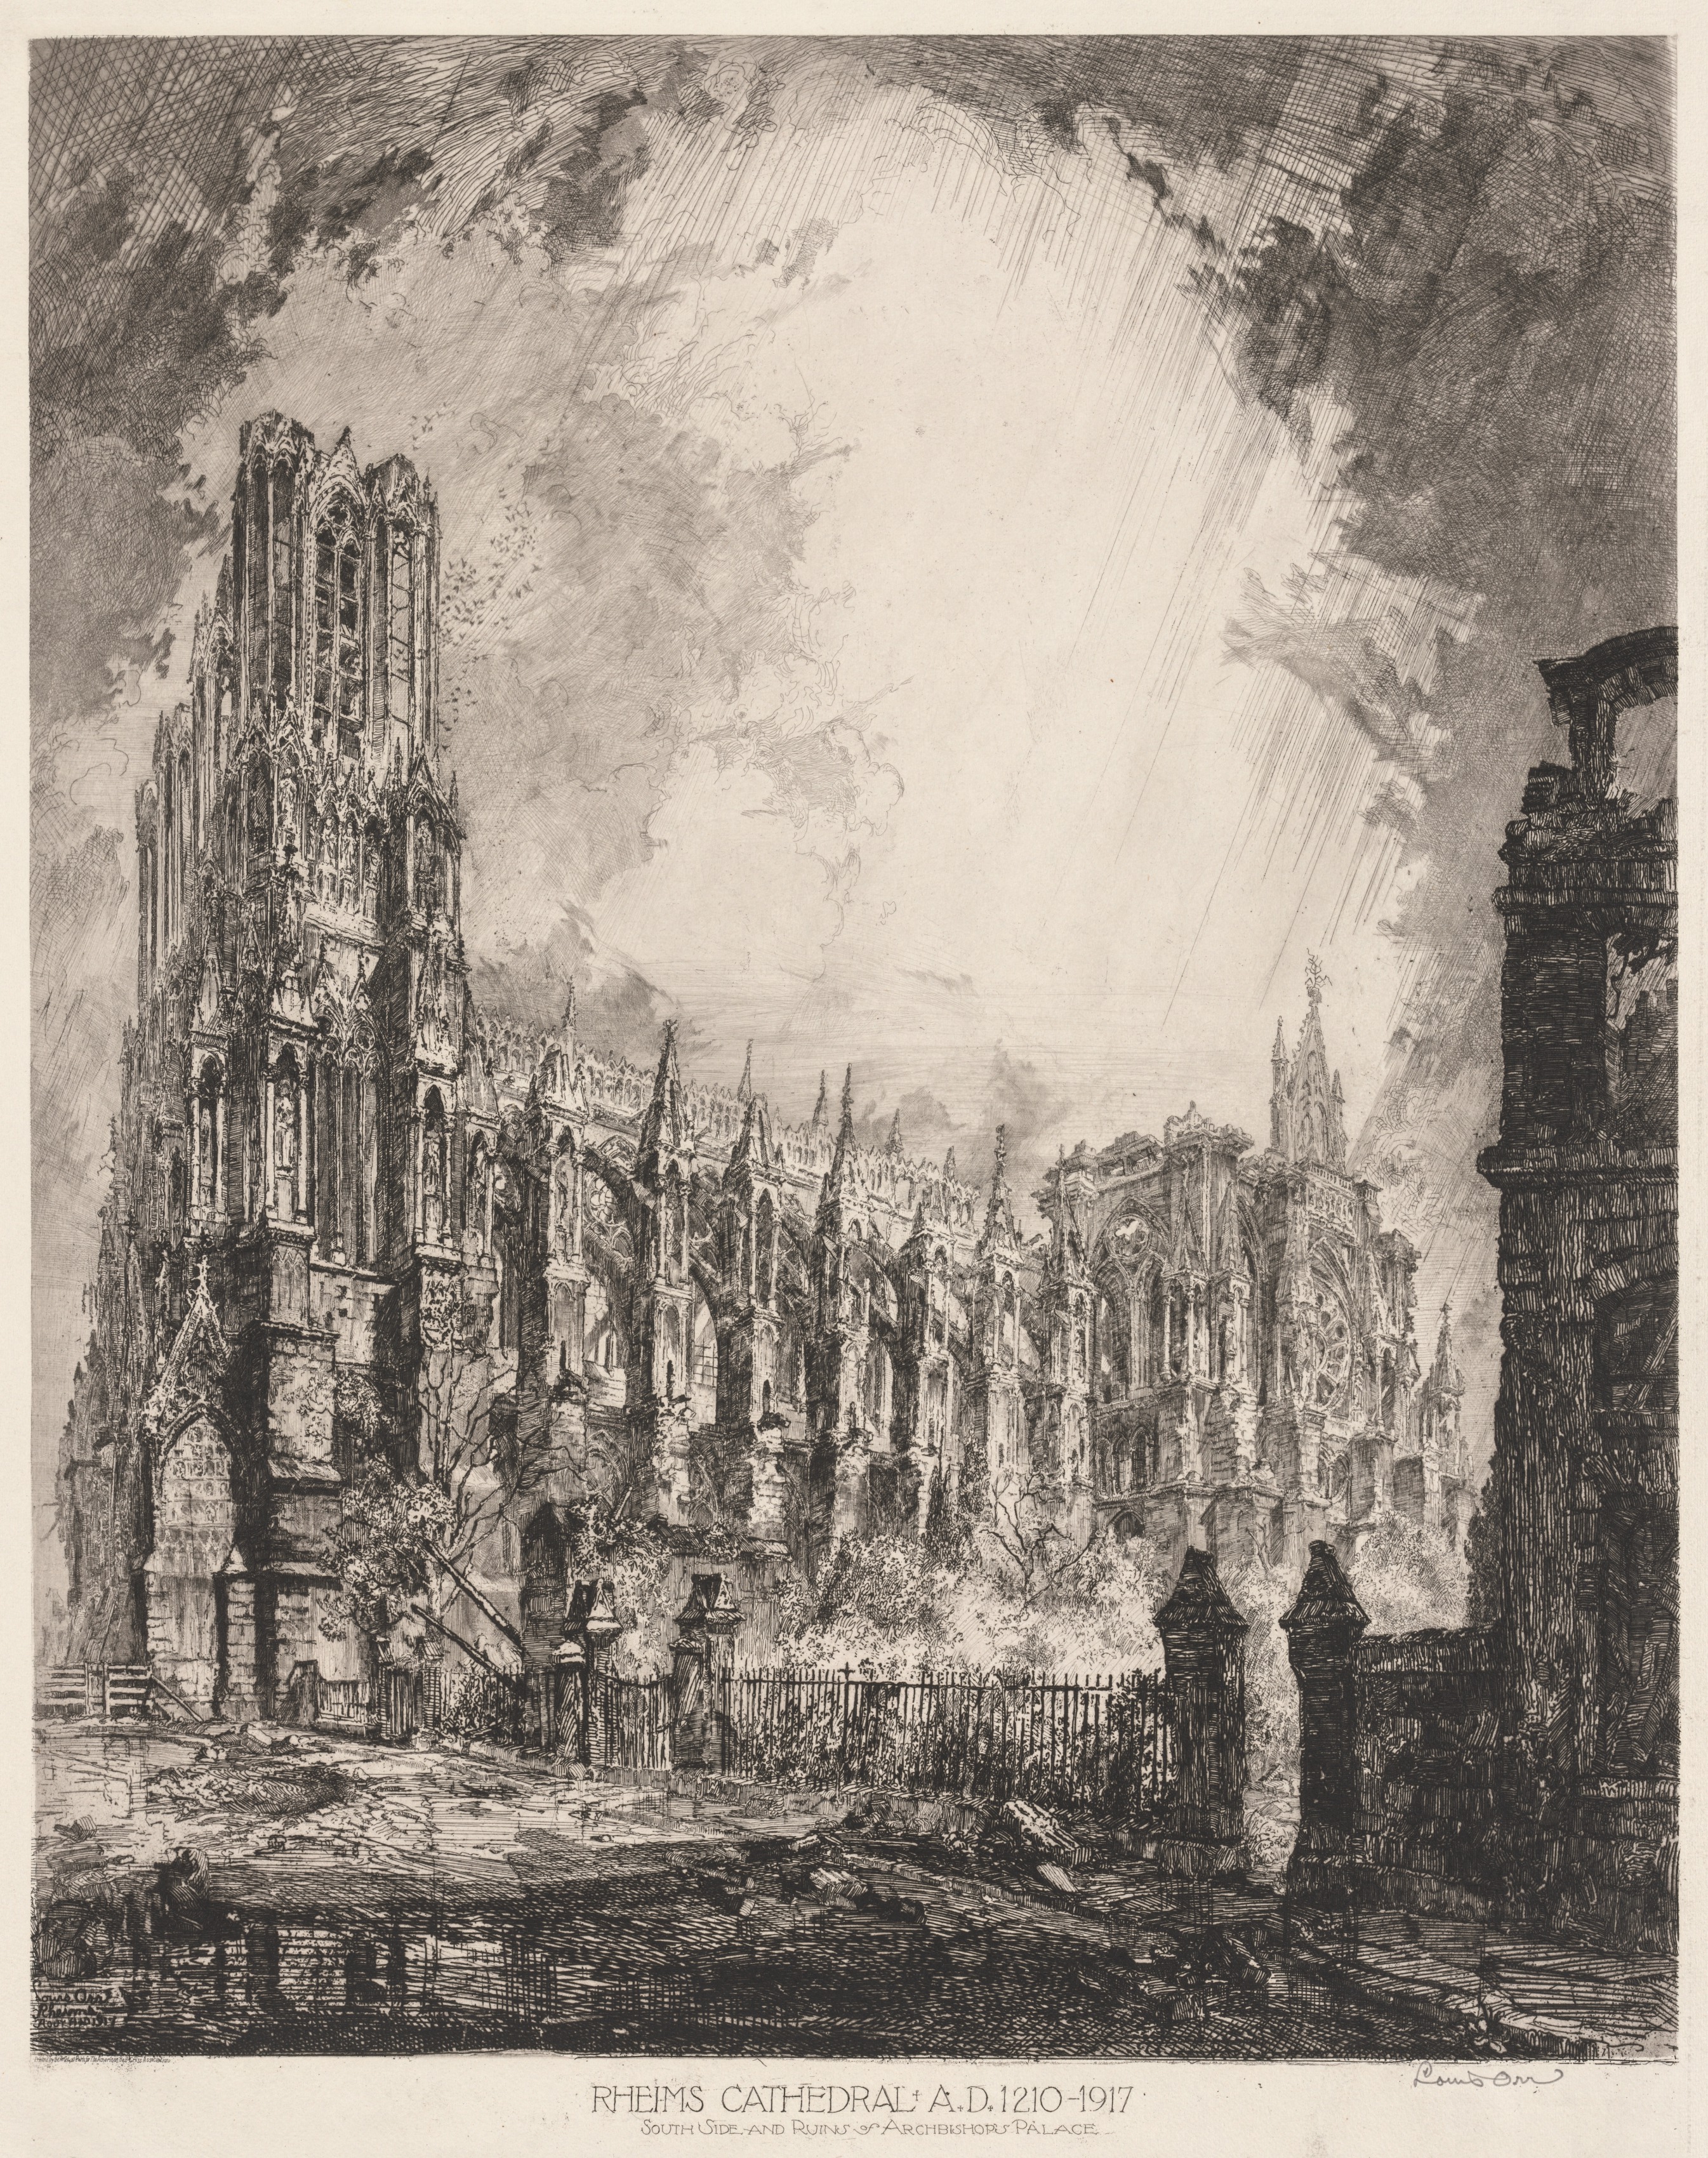 Rheims Cathedral and Ruins of Archbishop's Palace